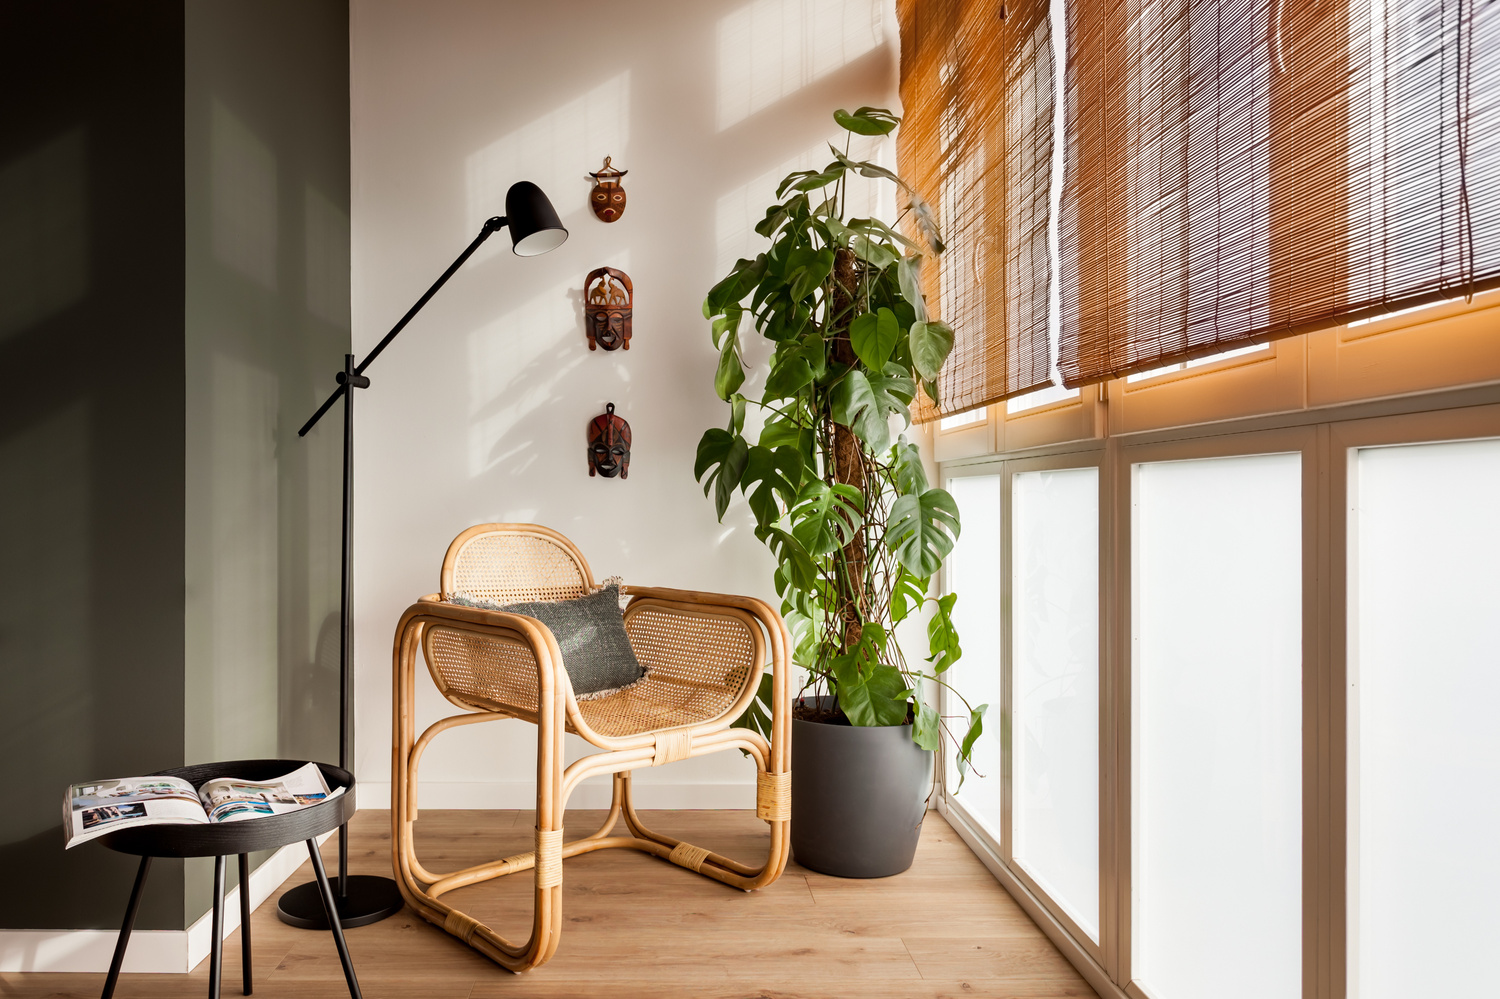 a room with a chair and a plant on the floor. Jungle home design, ethnic interior design, wicker rocking chair, monstera delicious plant, bamboo rolling curtains, interior design for VT wonen, home staging, Aptó interiors, Kelly Wearstler.